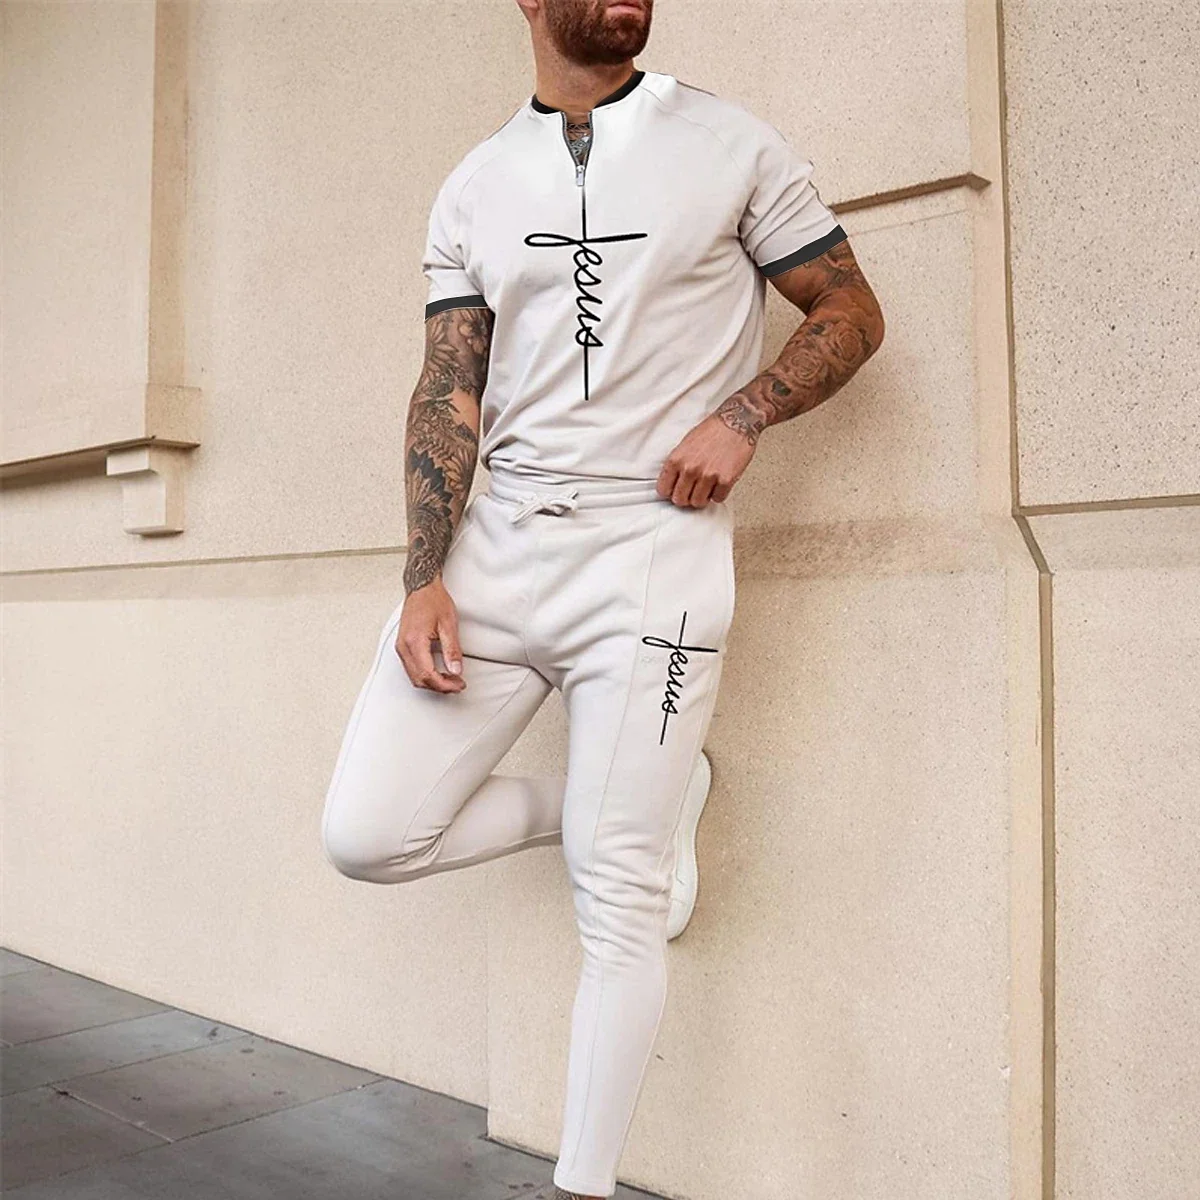 New Men's Trousers Casual Sports Suit summer Trend Short Sleeve T-shirt + Tooling Trousers Sports Fashion Men's Clothing Suit